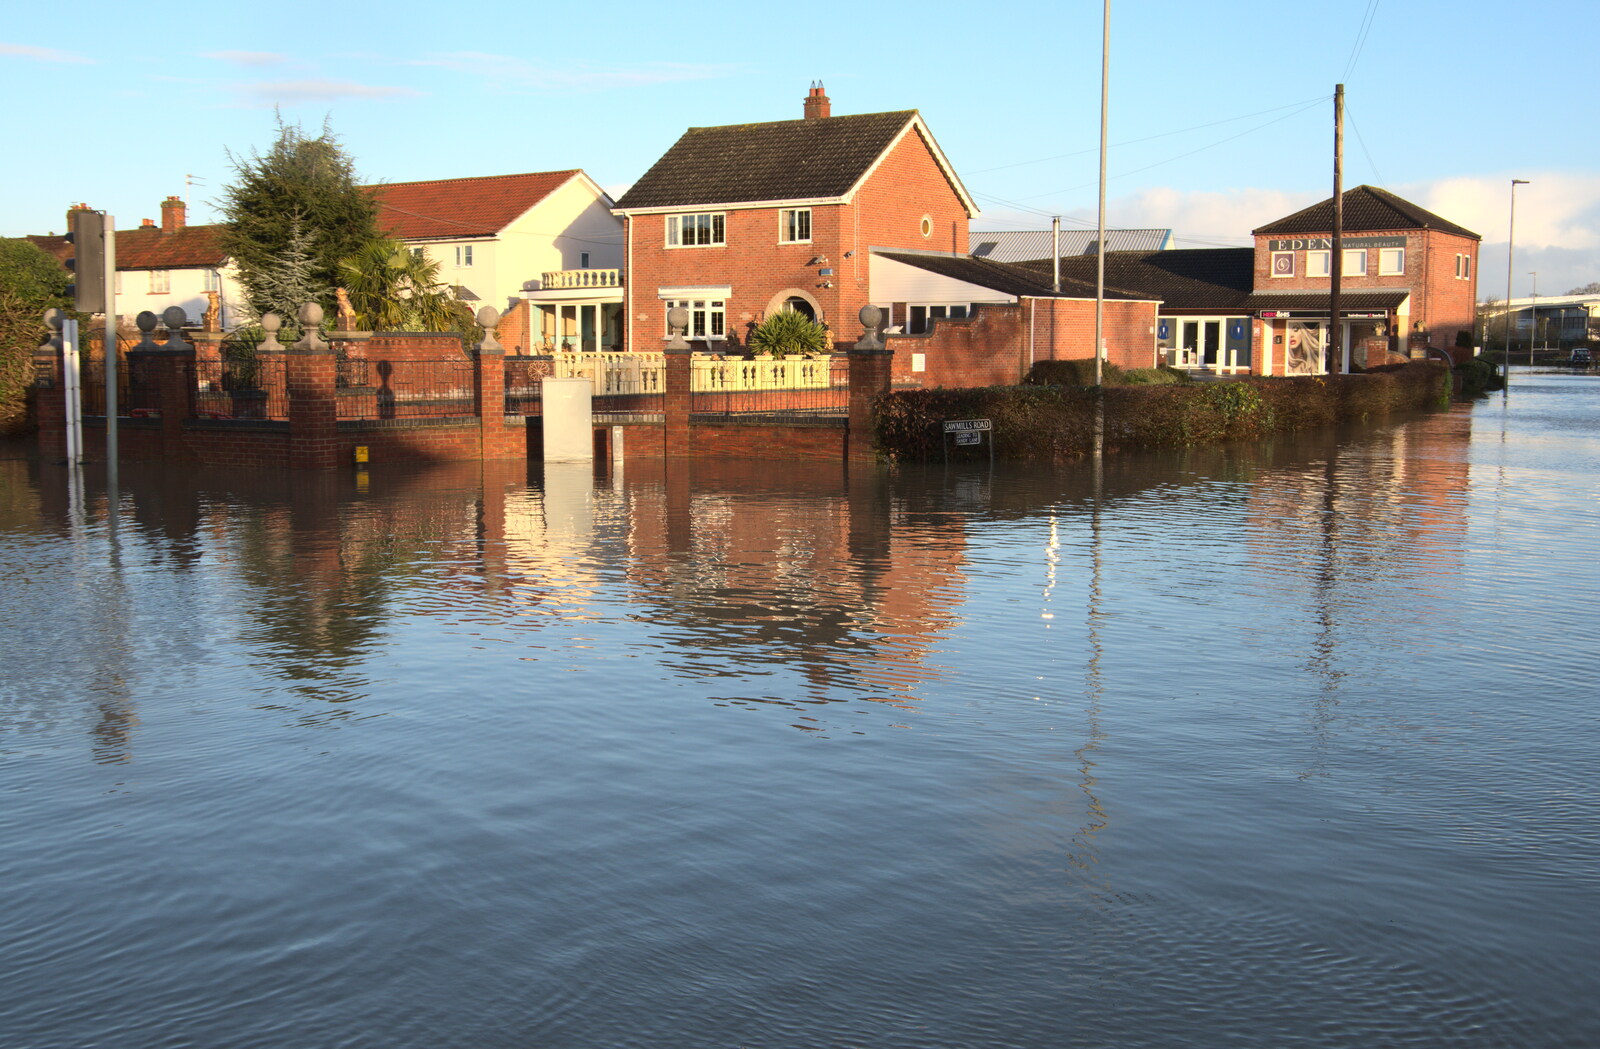 The junction of Sawmills Road from The Christmas Eve Floods, Diss, Norfolk - 24th December 2020